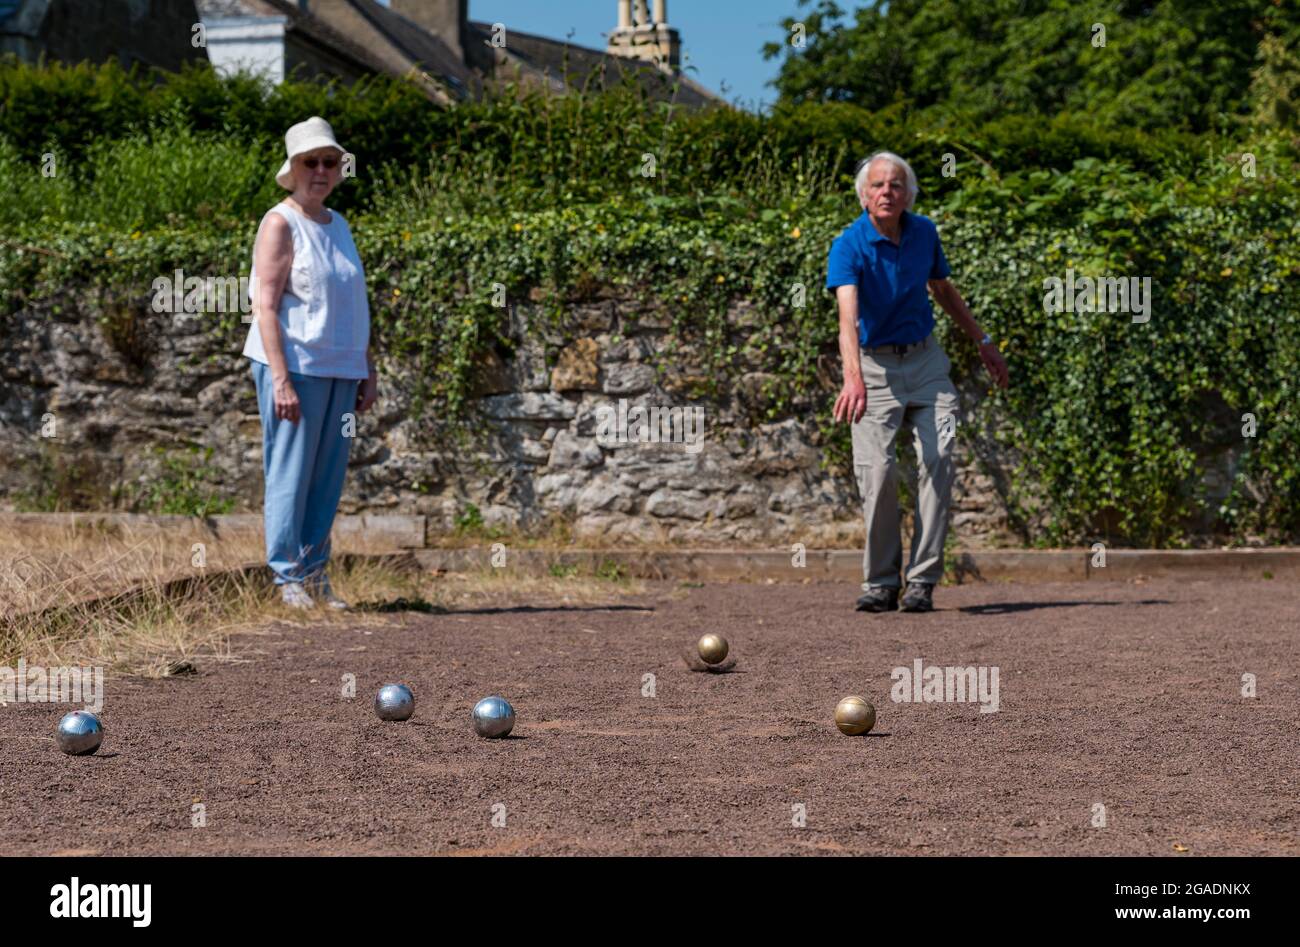 Senior citizens, older people or pensioners playing petanque or boules in Summer sunshine, Haddington, East Lothian, Scotland, UK Stock Photo